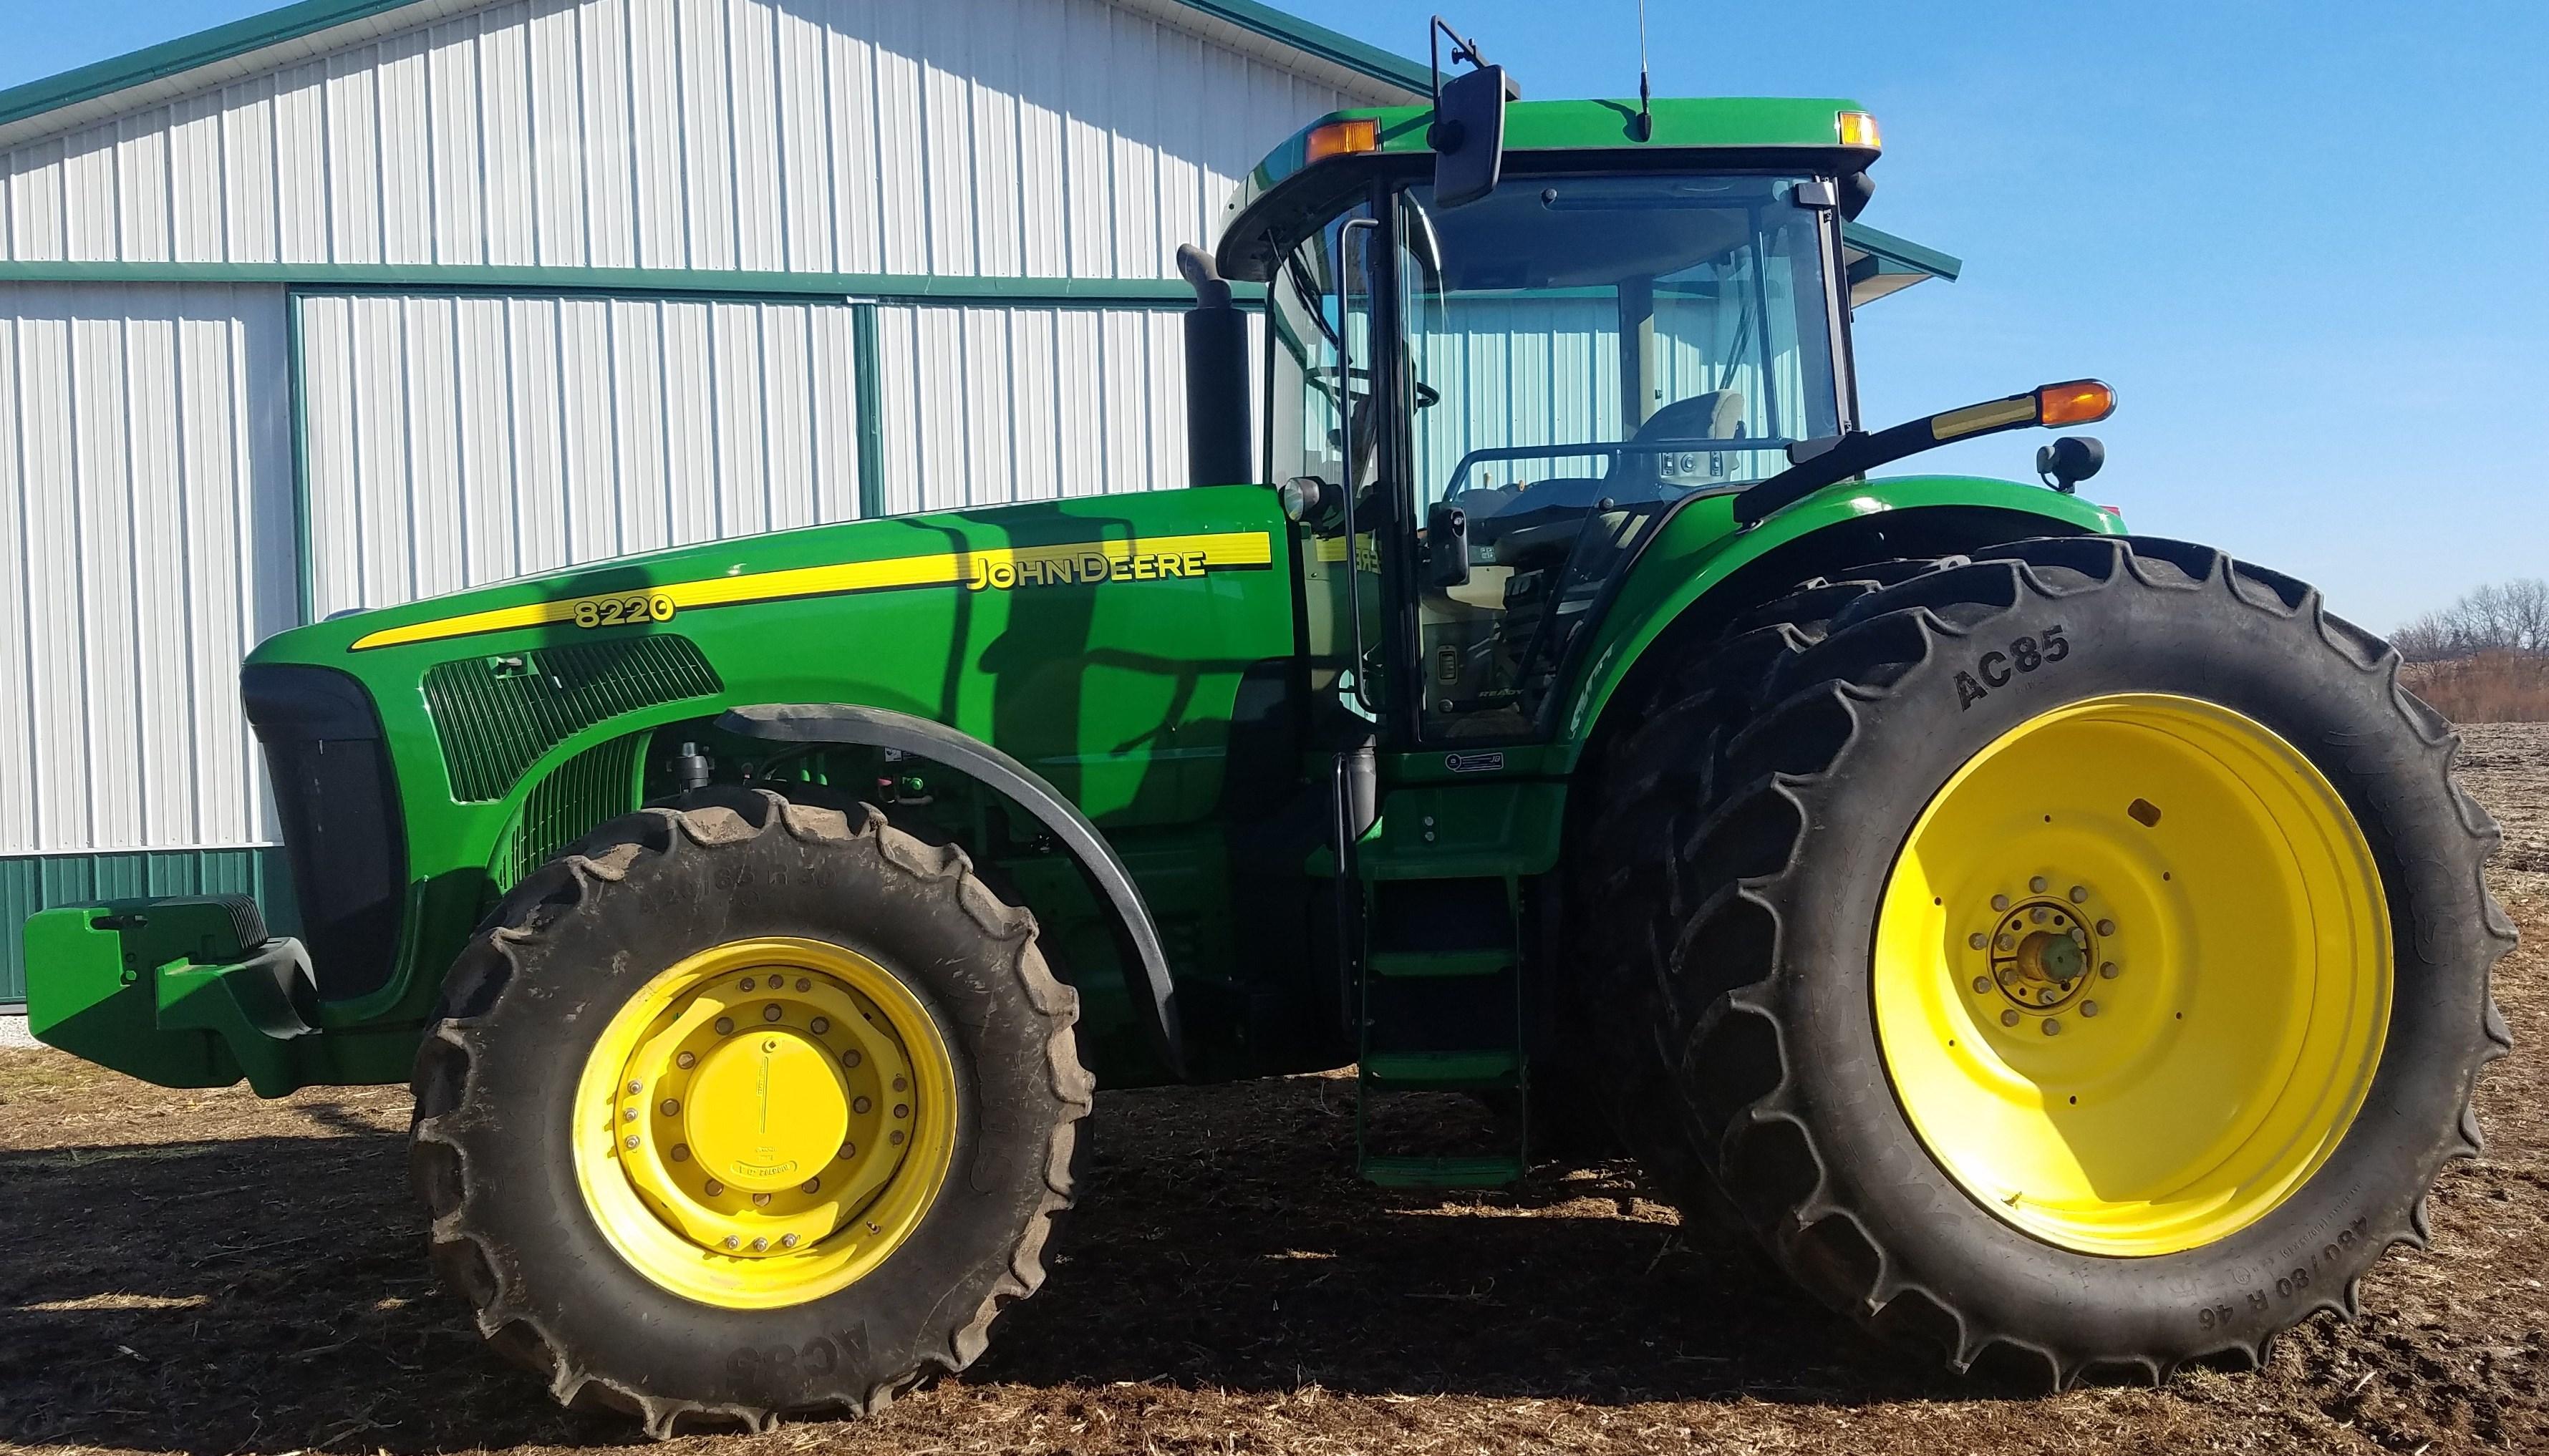 ’04 JD 8220 MFWD Tractor